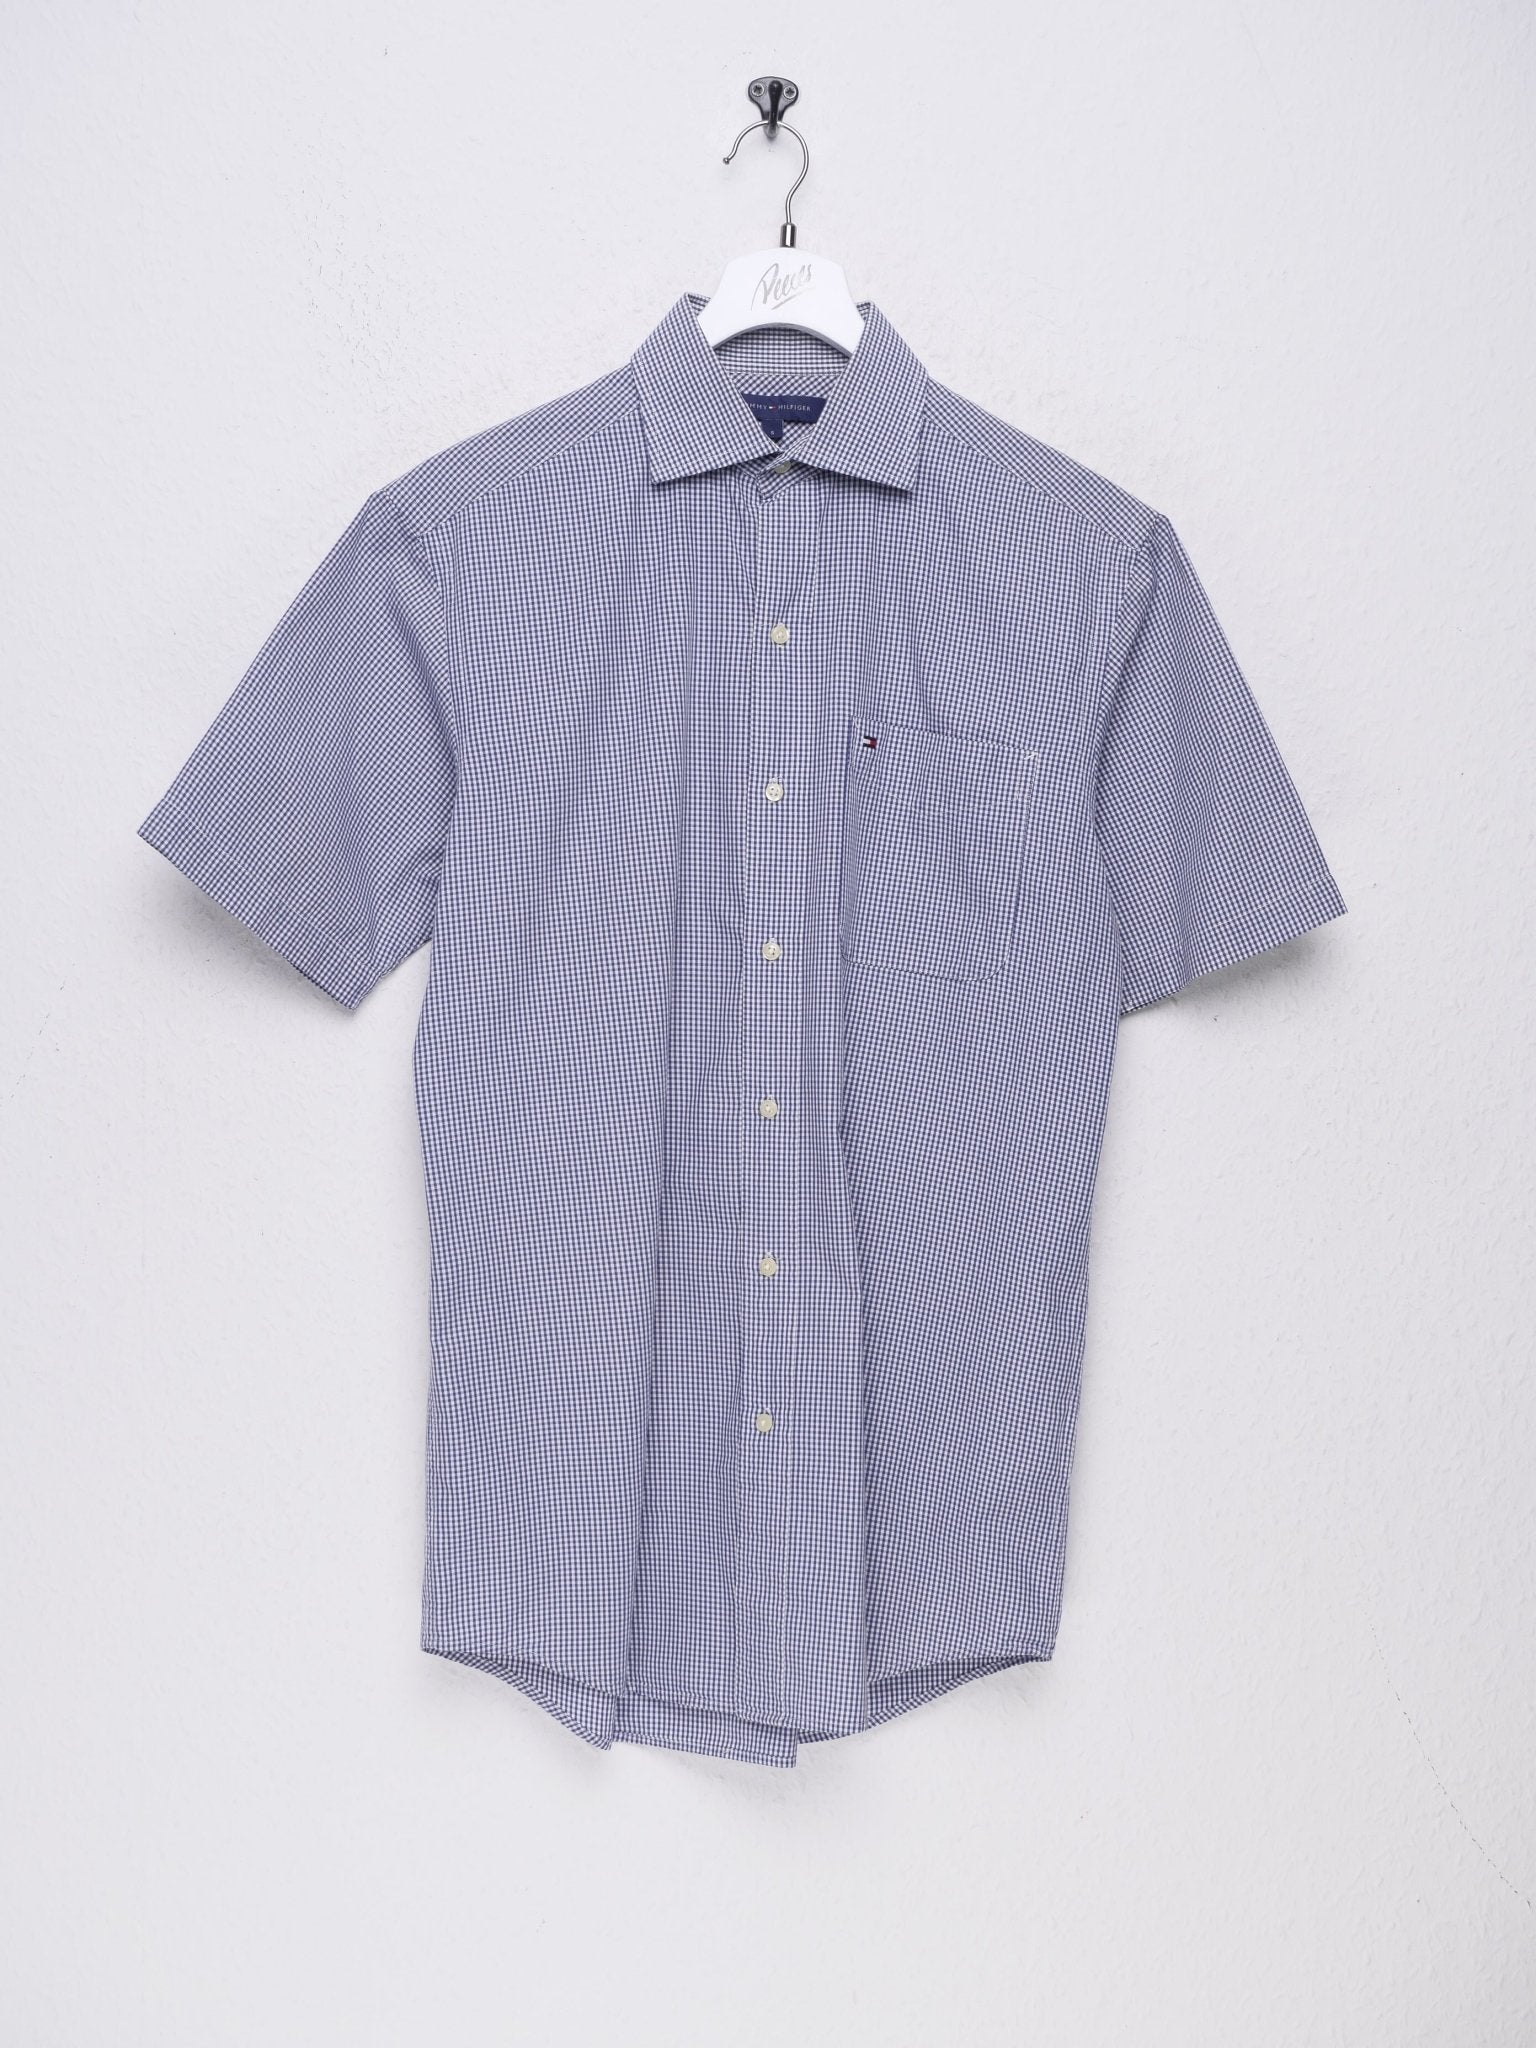 Tommy Hilfiger embroidered Logo Button Down Shirt - Peeces